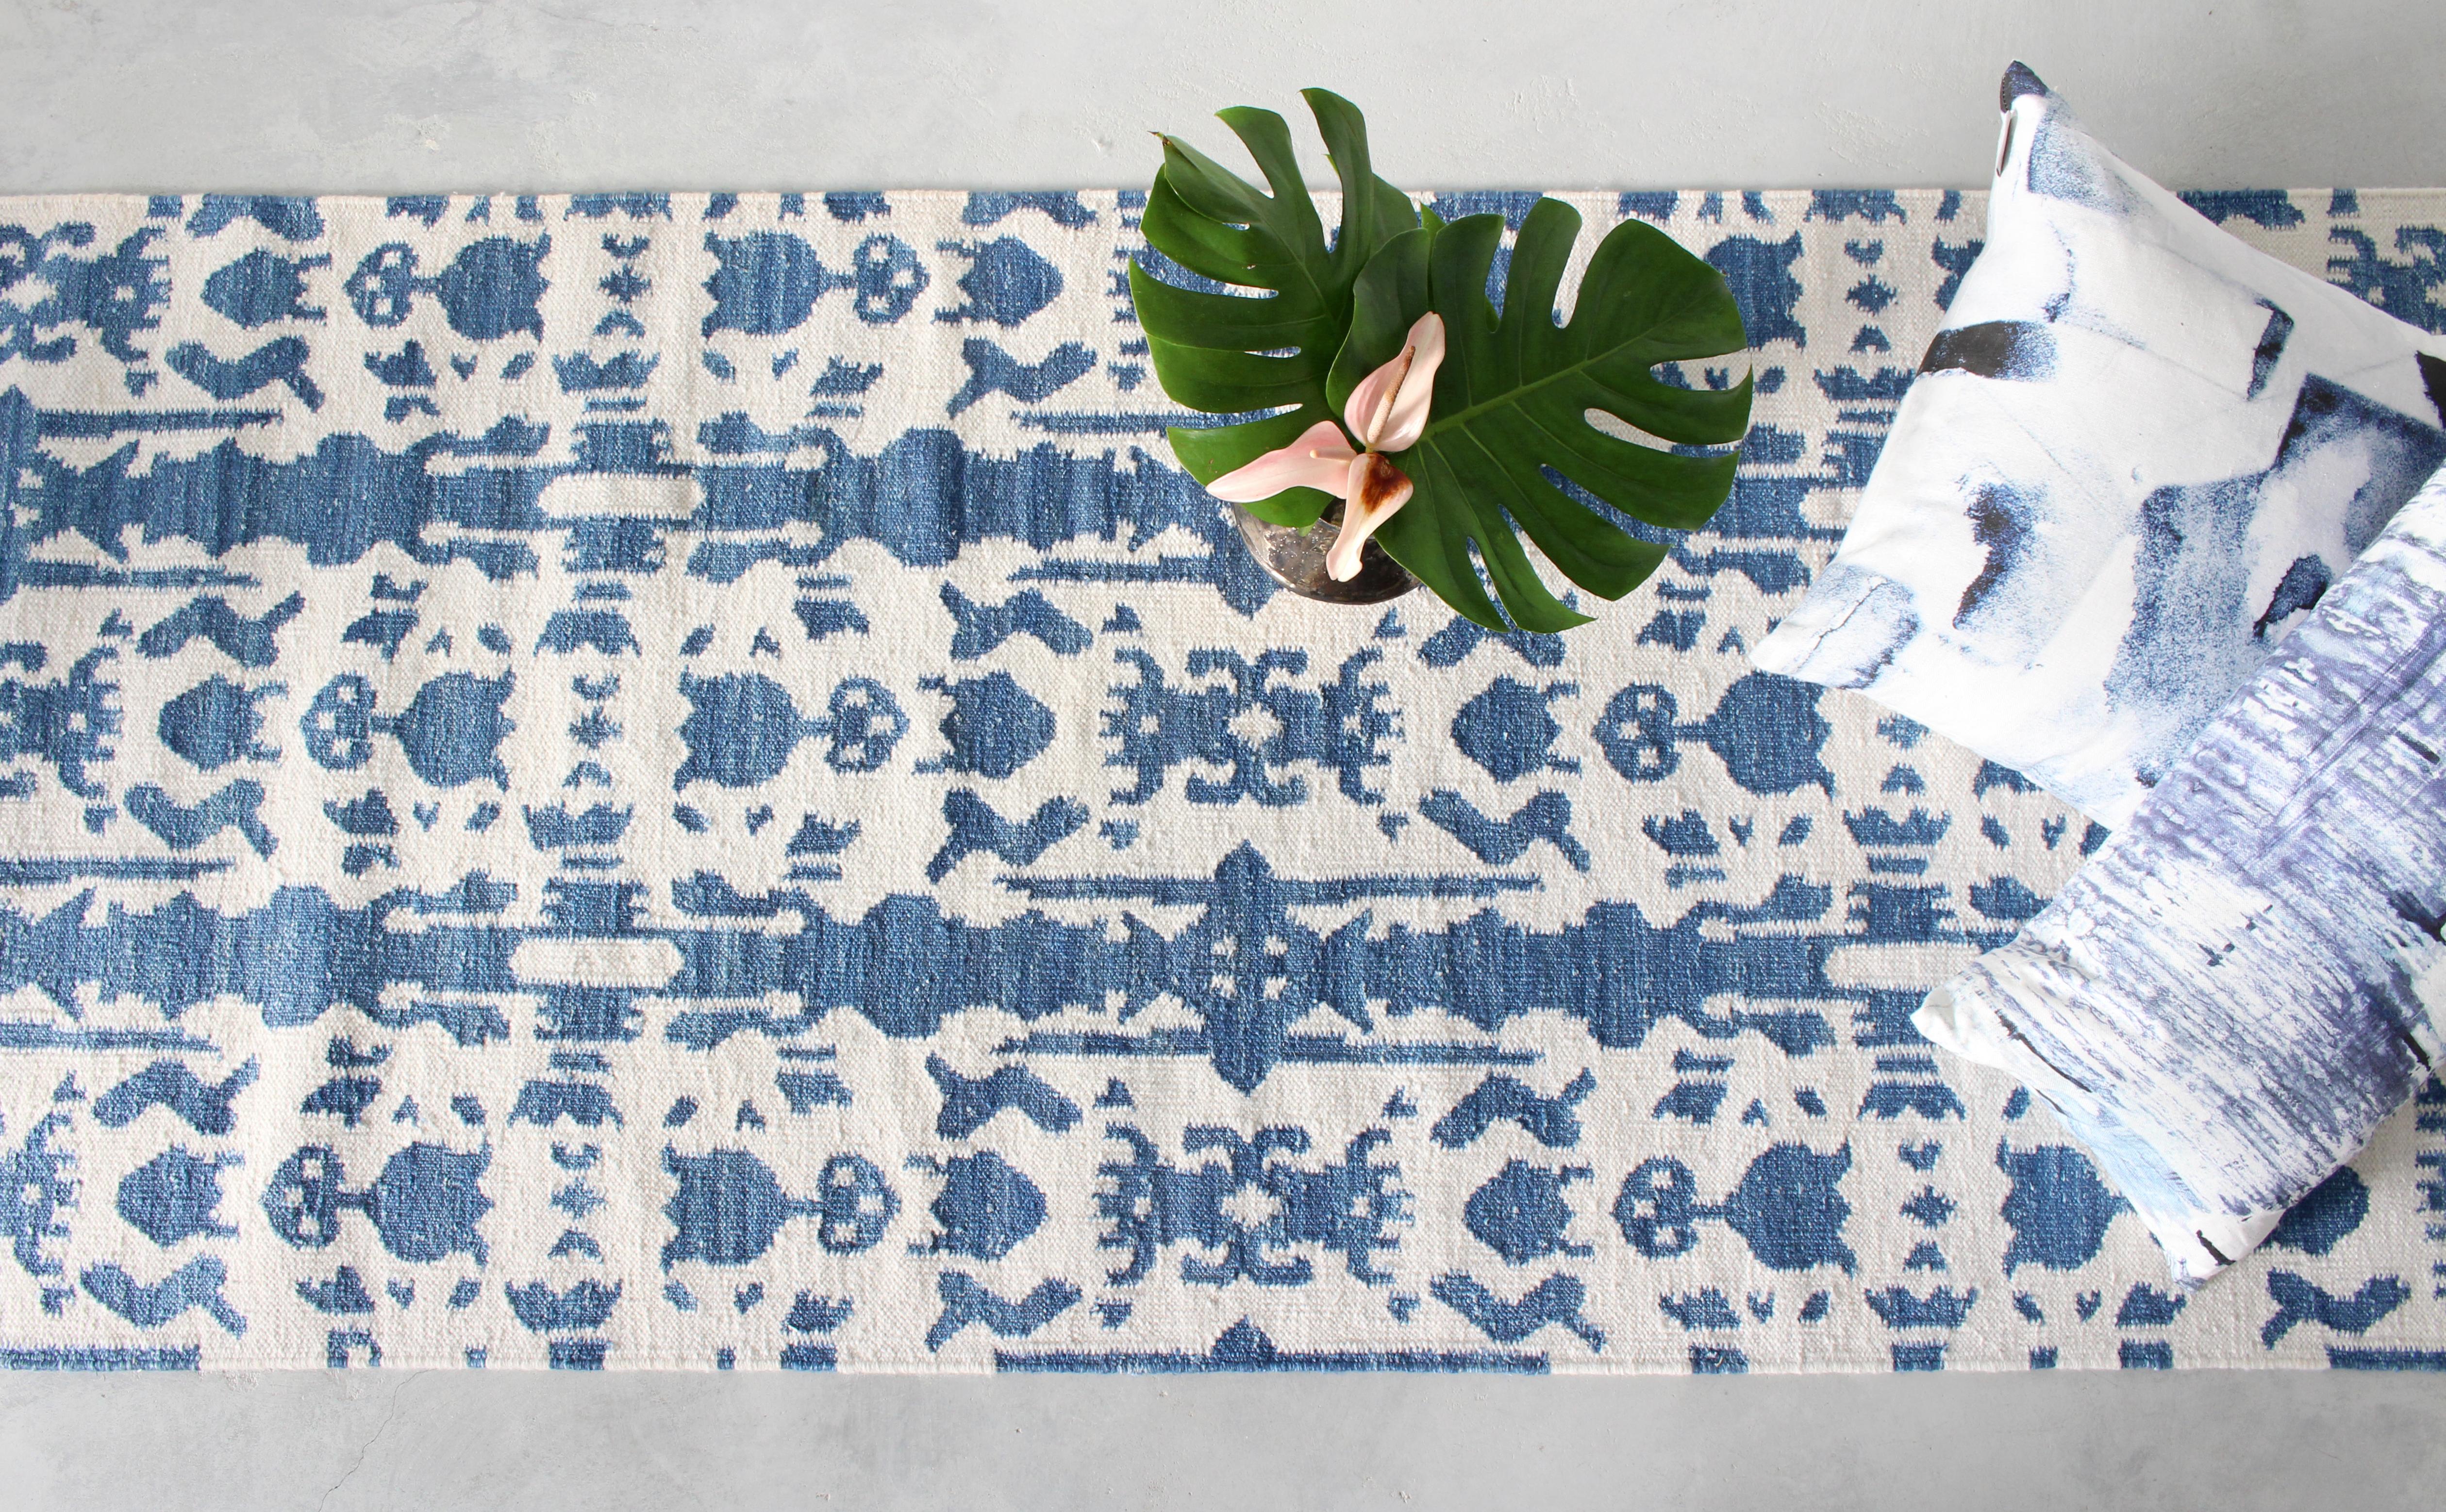 Rug Pattern: Biami - Indigo
Material: Bamboo Silk Design/New Zealand Wool Background
Quality: Flat-weave, handwoven 
Size: 2'-6